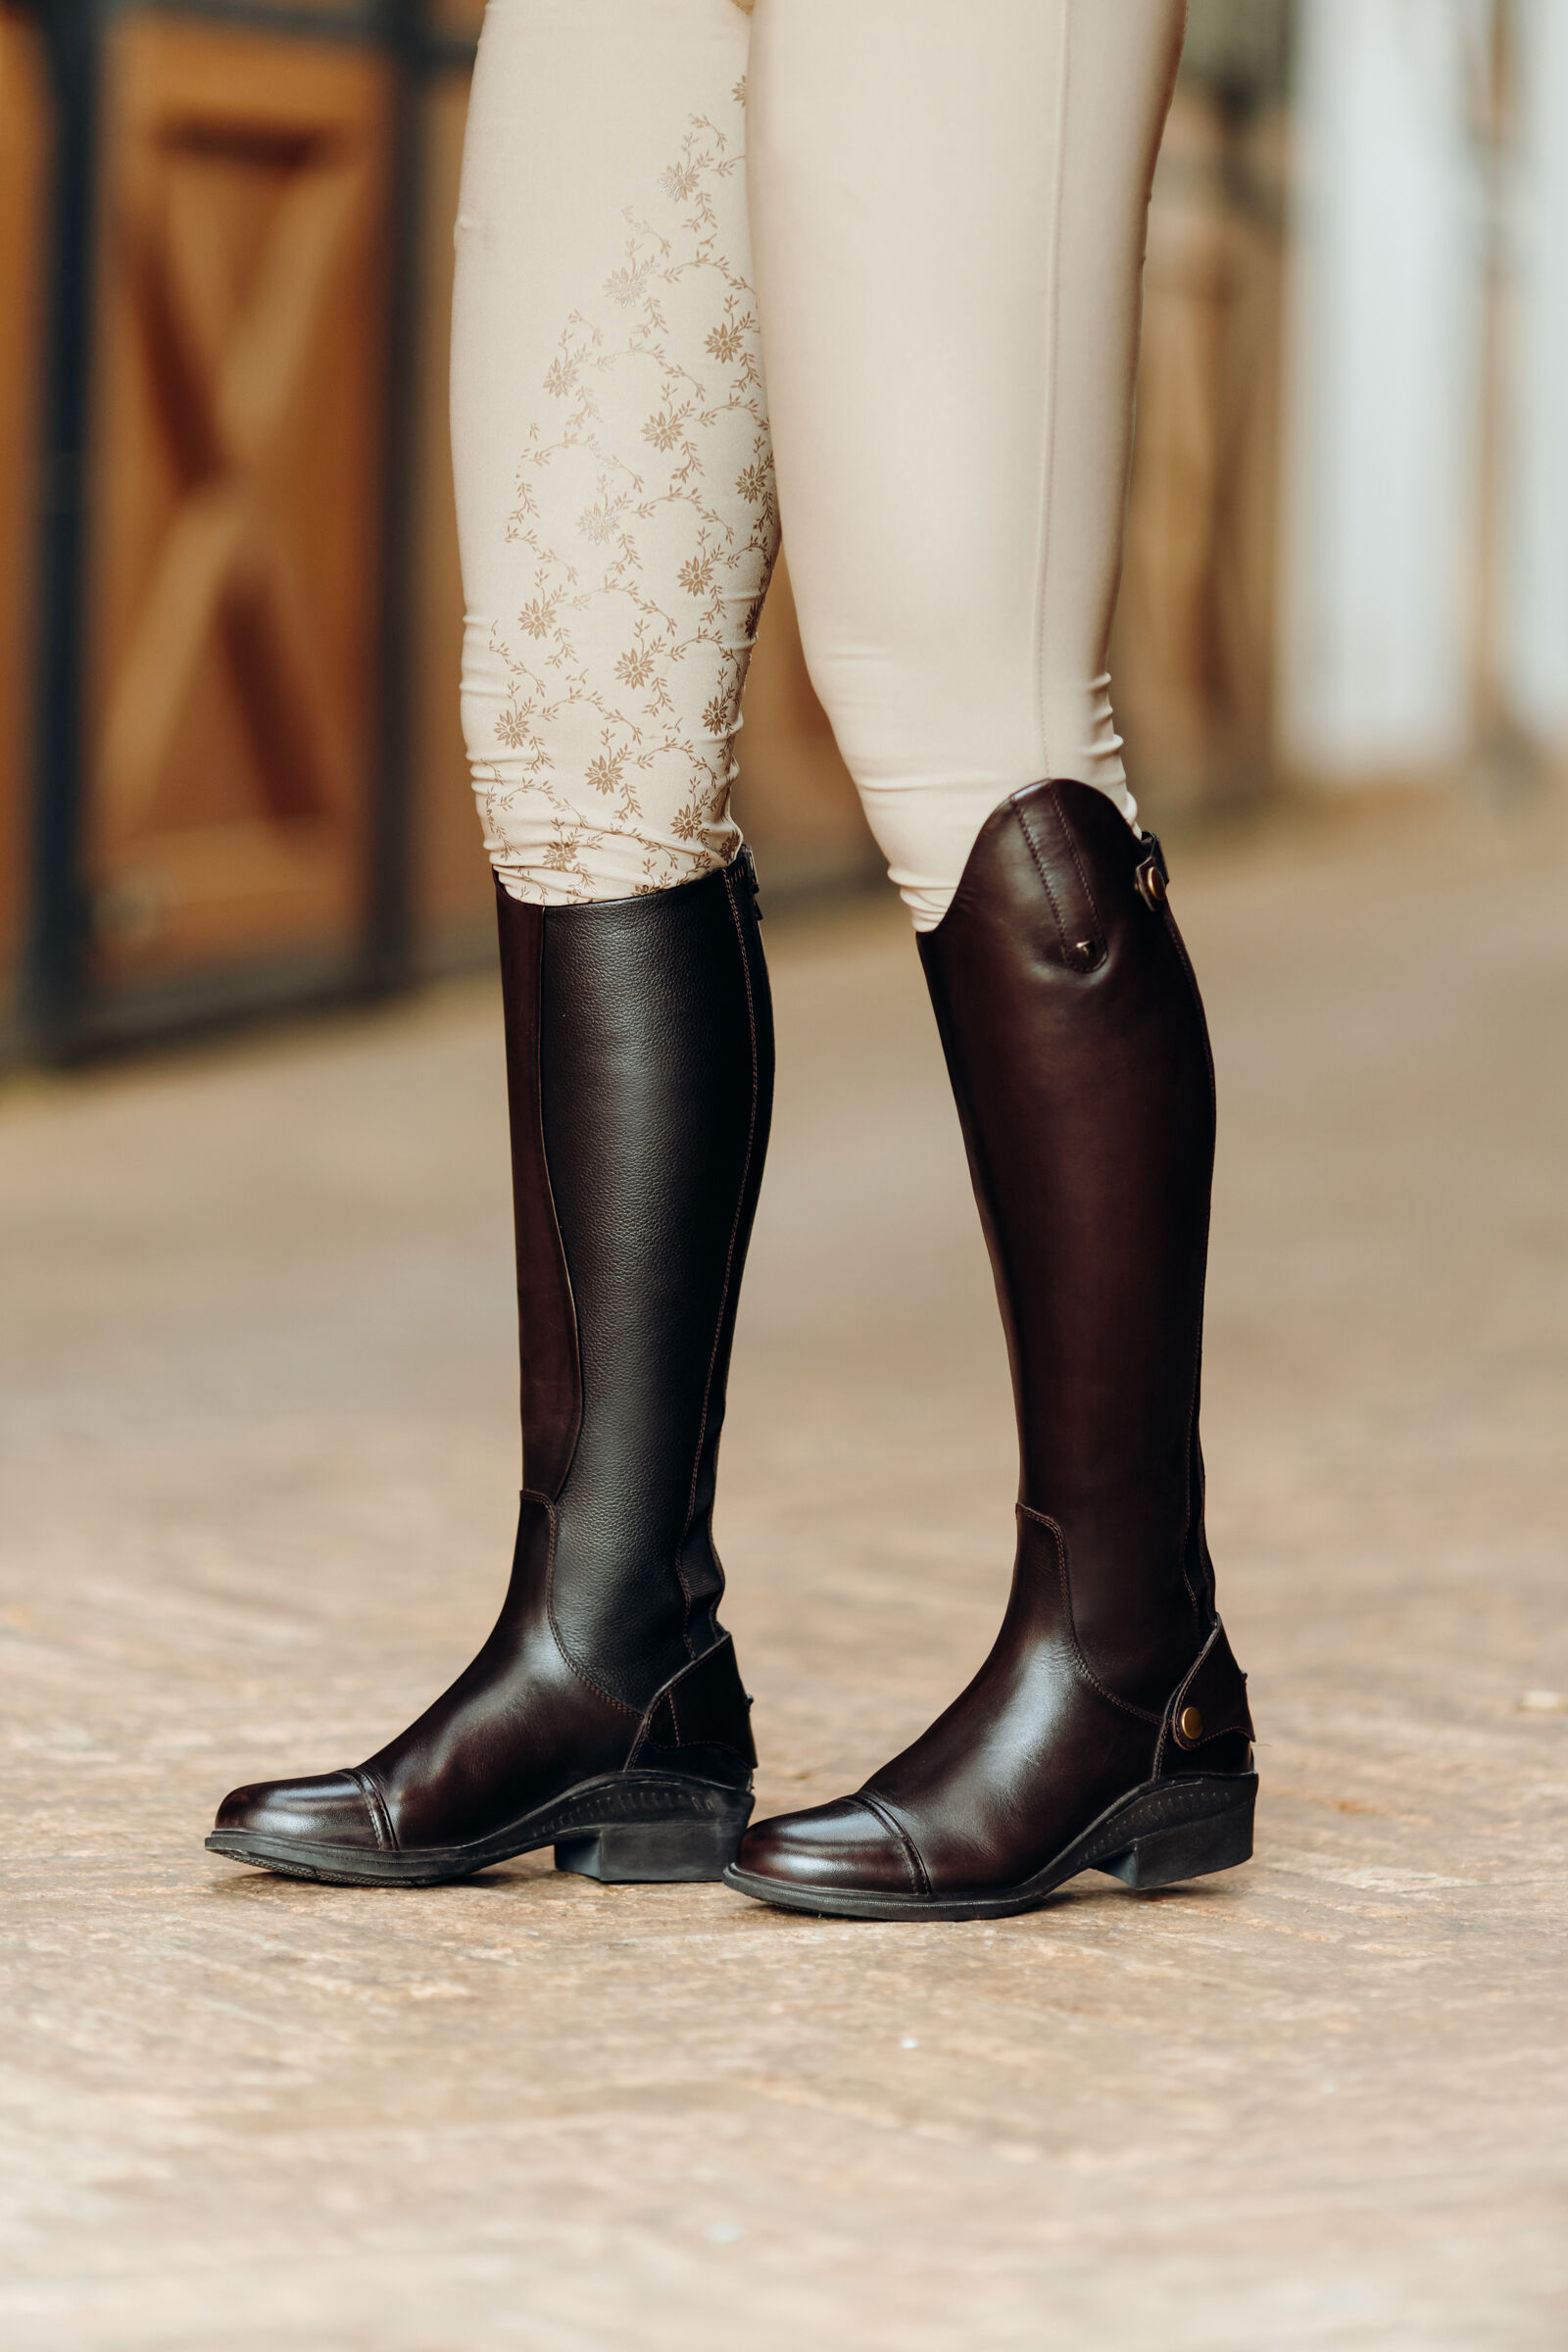 Tall Leather Womens Boots Online | bellvalefarms.com